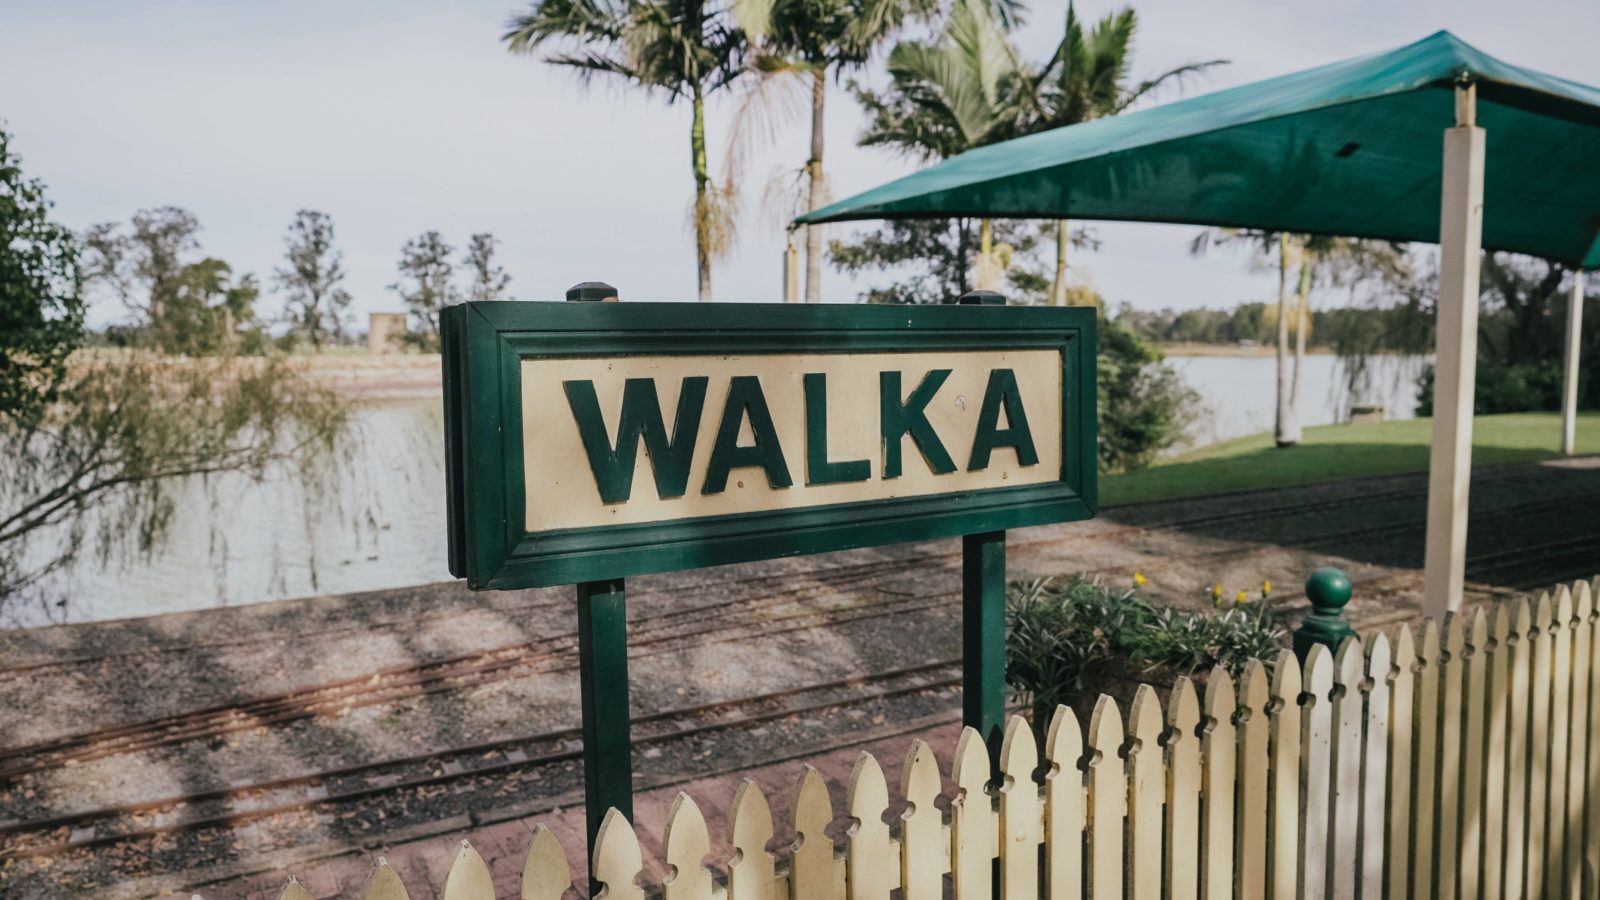 Walka Recreation and Wildlife Reserve